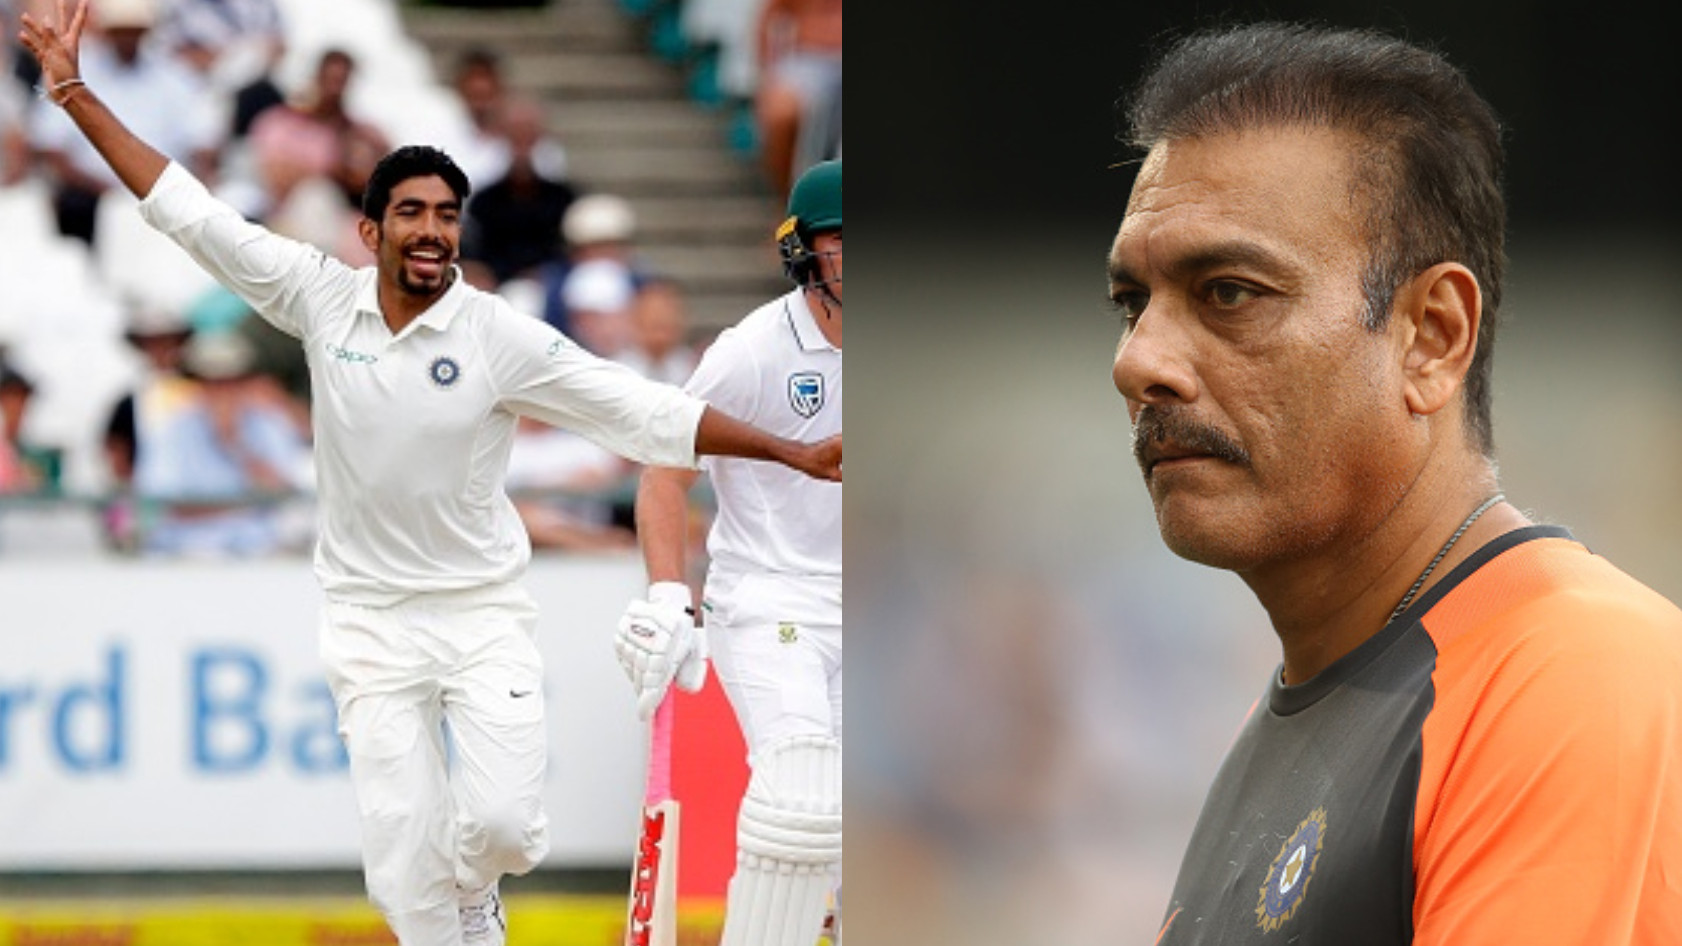 No one believed he could play Tests- Shastri reveals how he helped Bumrah debut in South Africa 